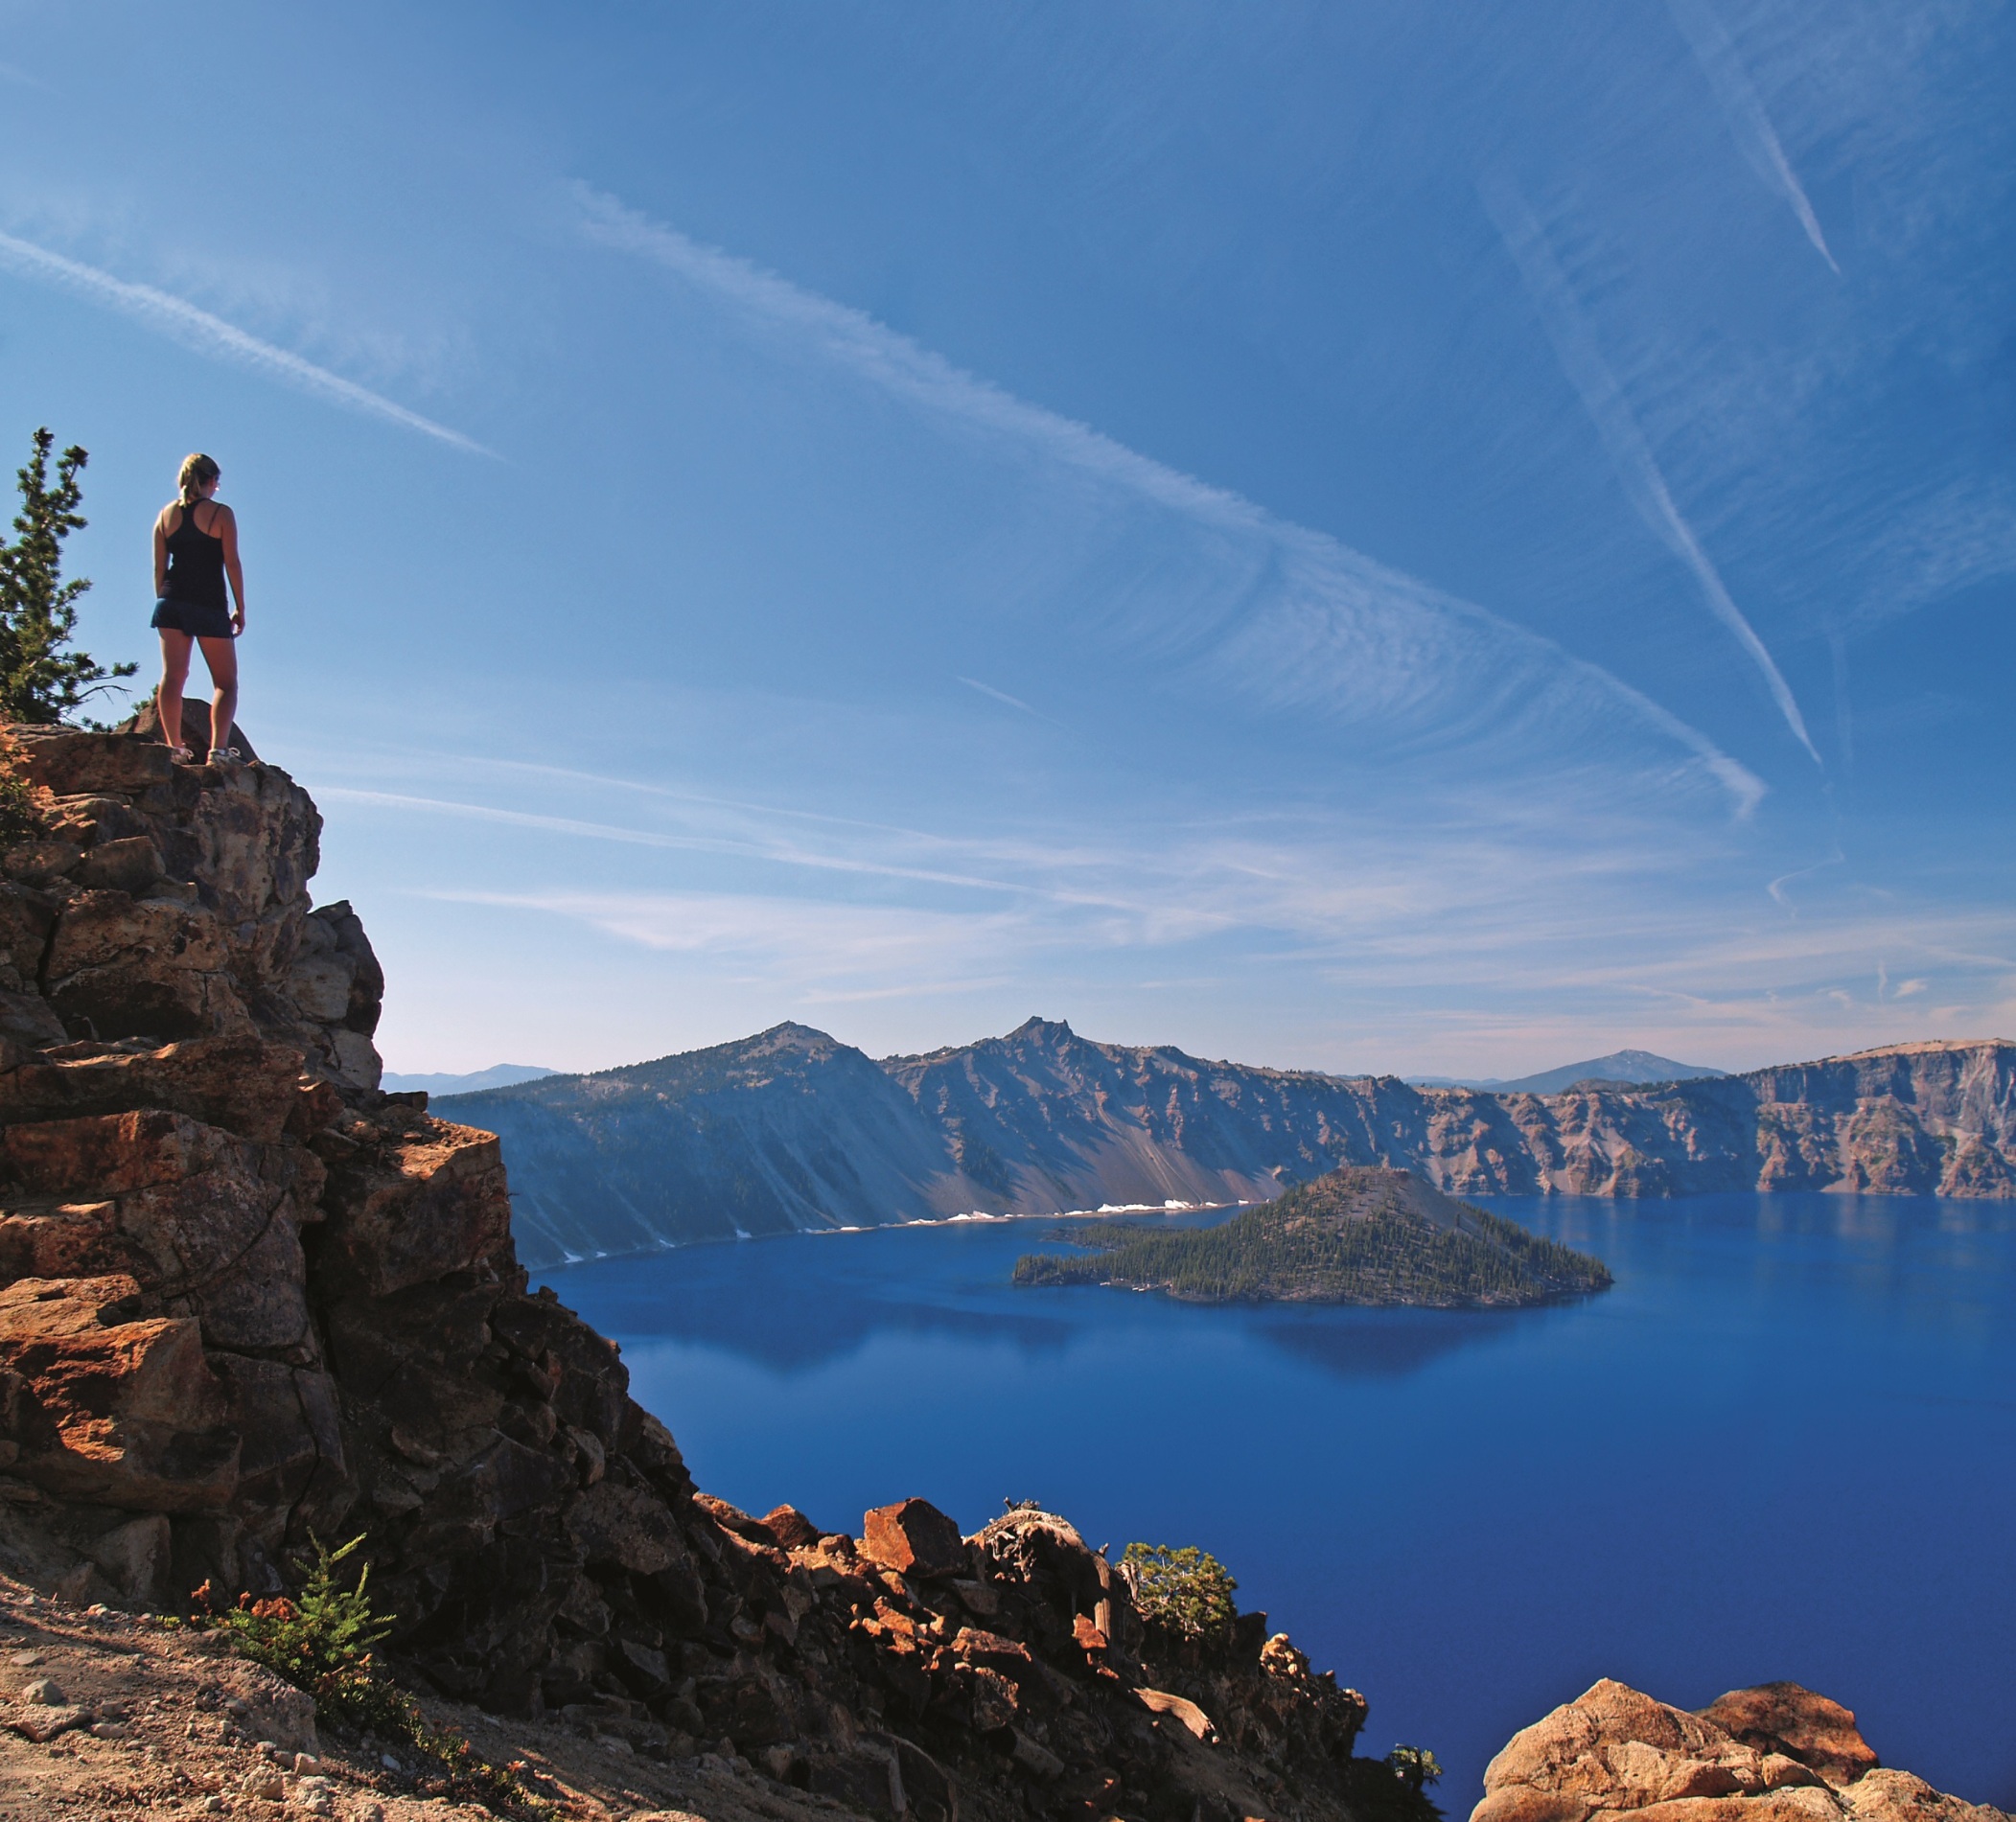 Girl looks out over the expanse of the deep blues of Crater Lake standing on a precarious rock outcrop